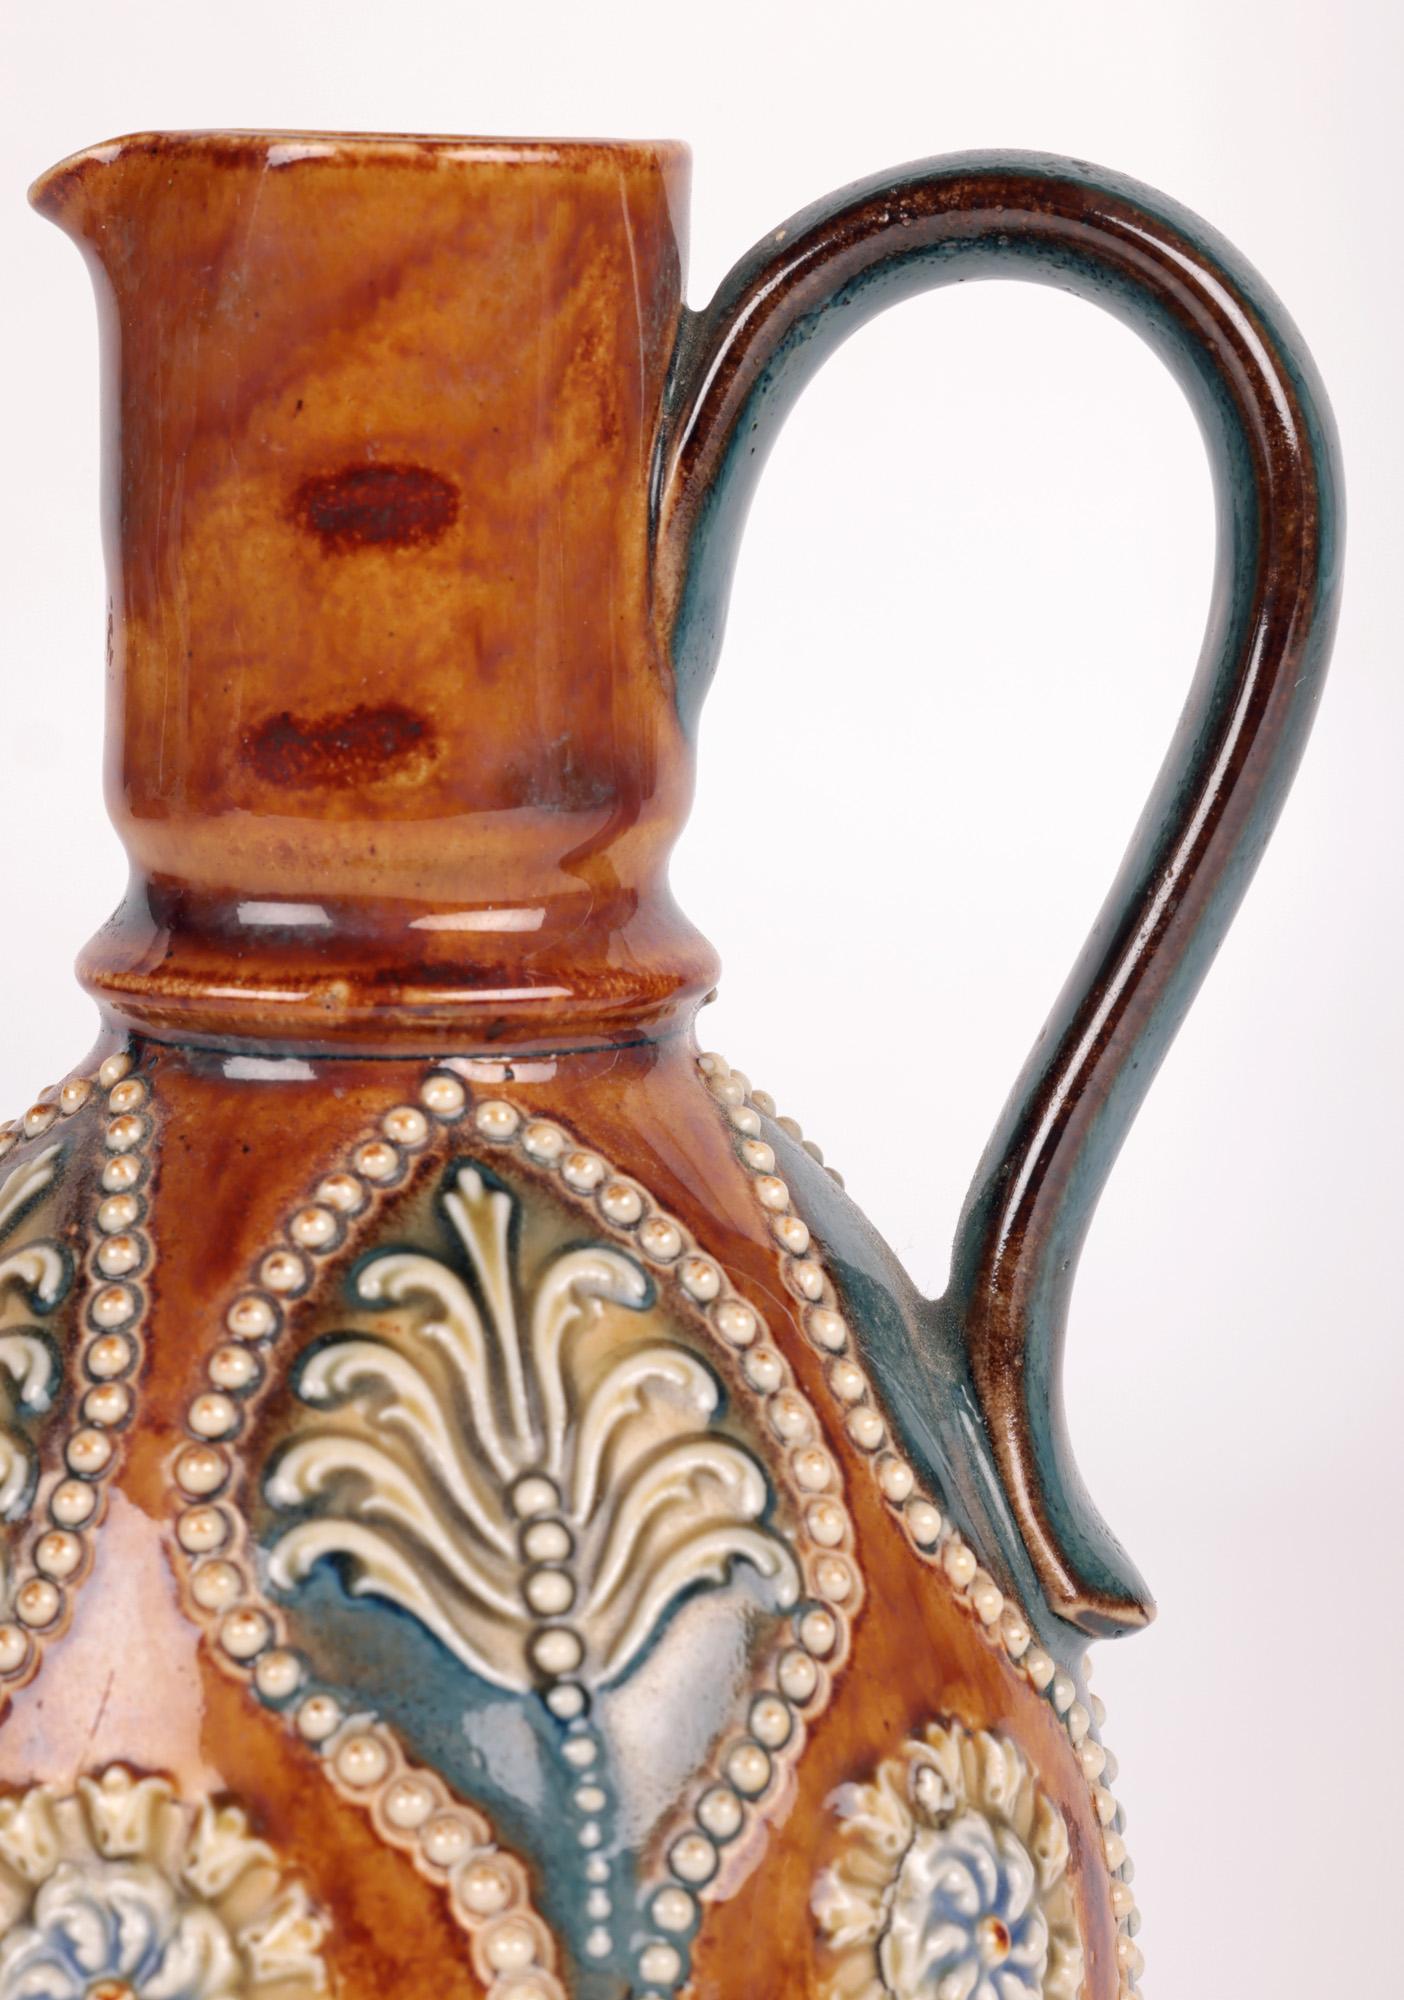 A very stylish Art Nouveau Doulton Lambeth jug decorated with leaf and floral designs by renowned junior artists Annie Partridge and Georgian Pearson and dating from around 1905. The stoneware jug stands raised on a wide round foot with a round